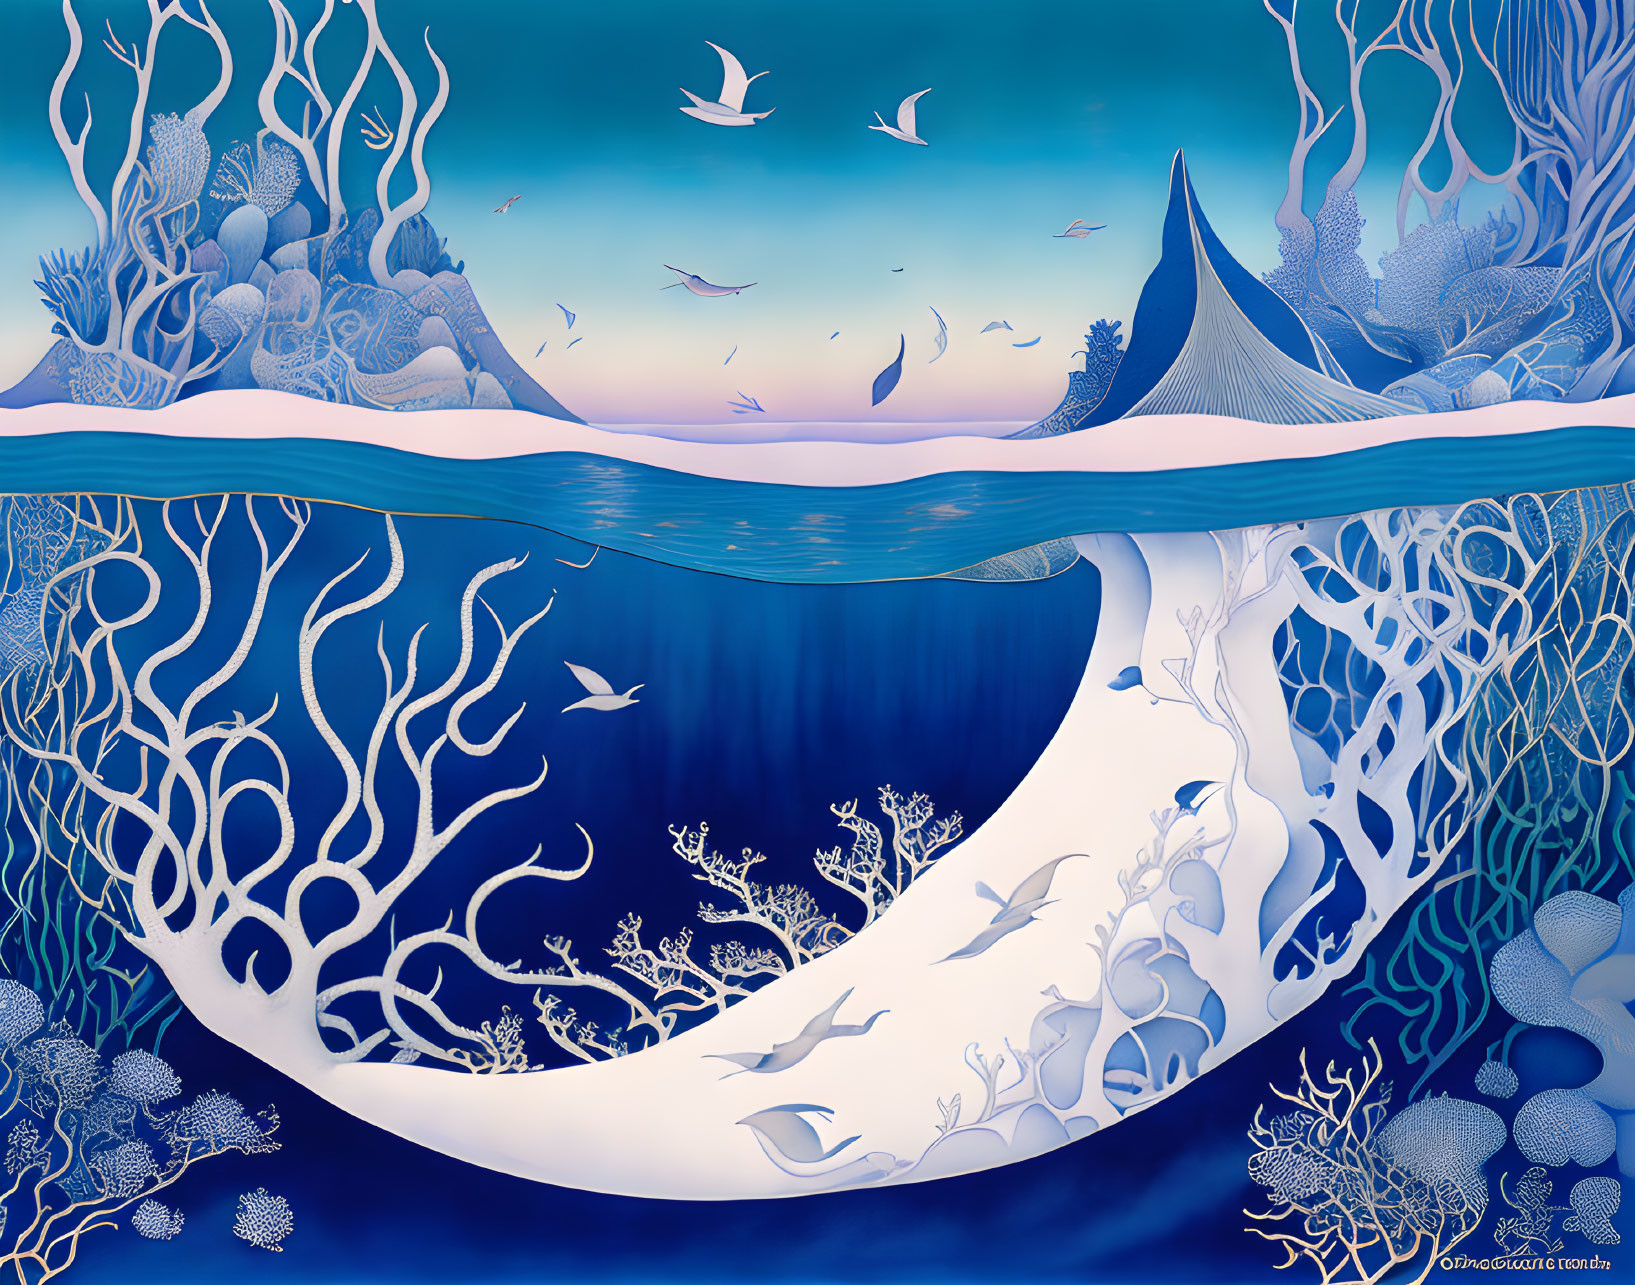 Blue Underwater Scene with Whale, Coral, Fish, and Seabirds